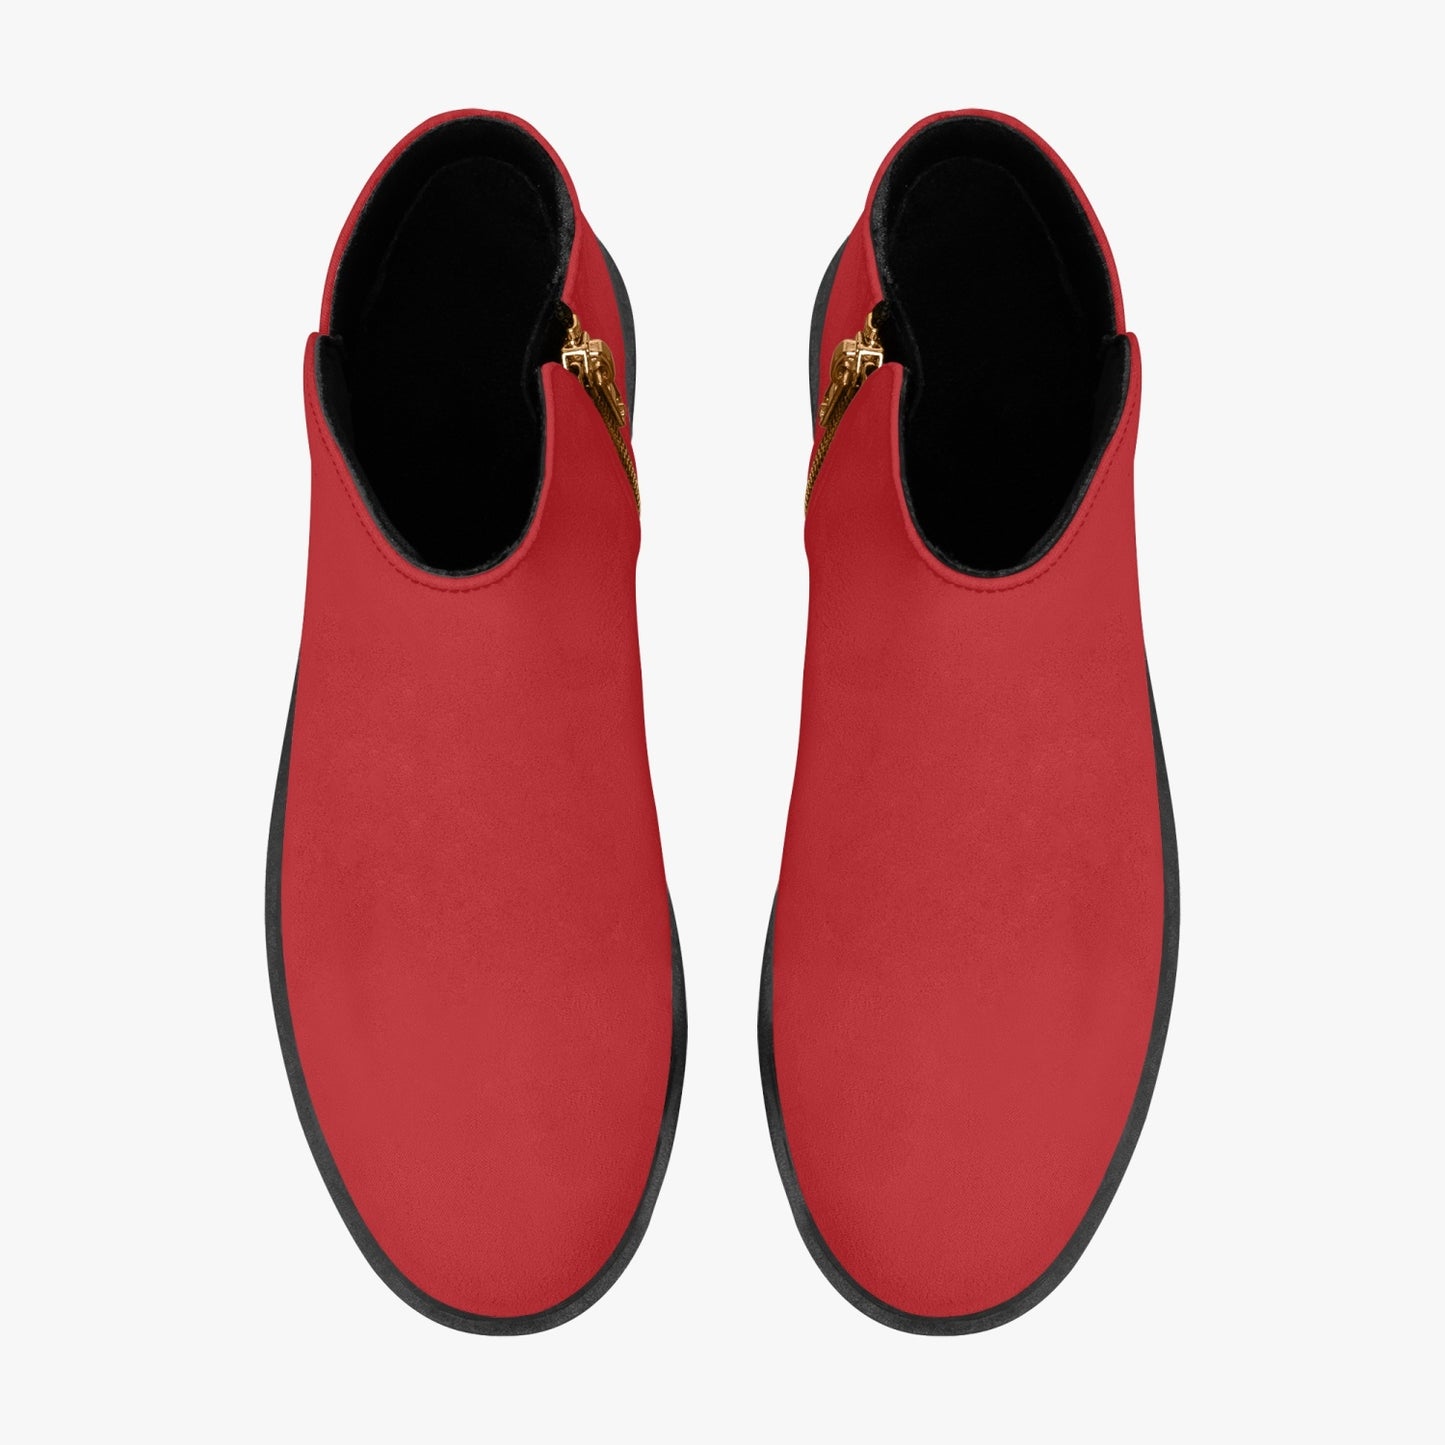 Red Zipper Unisex Suede Ankle Boots